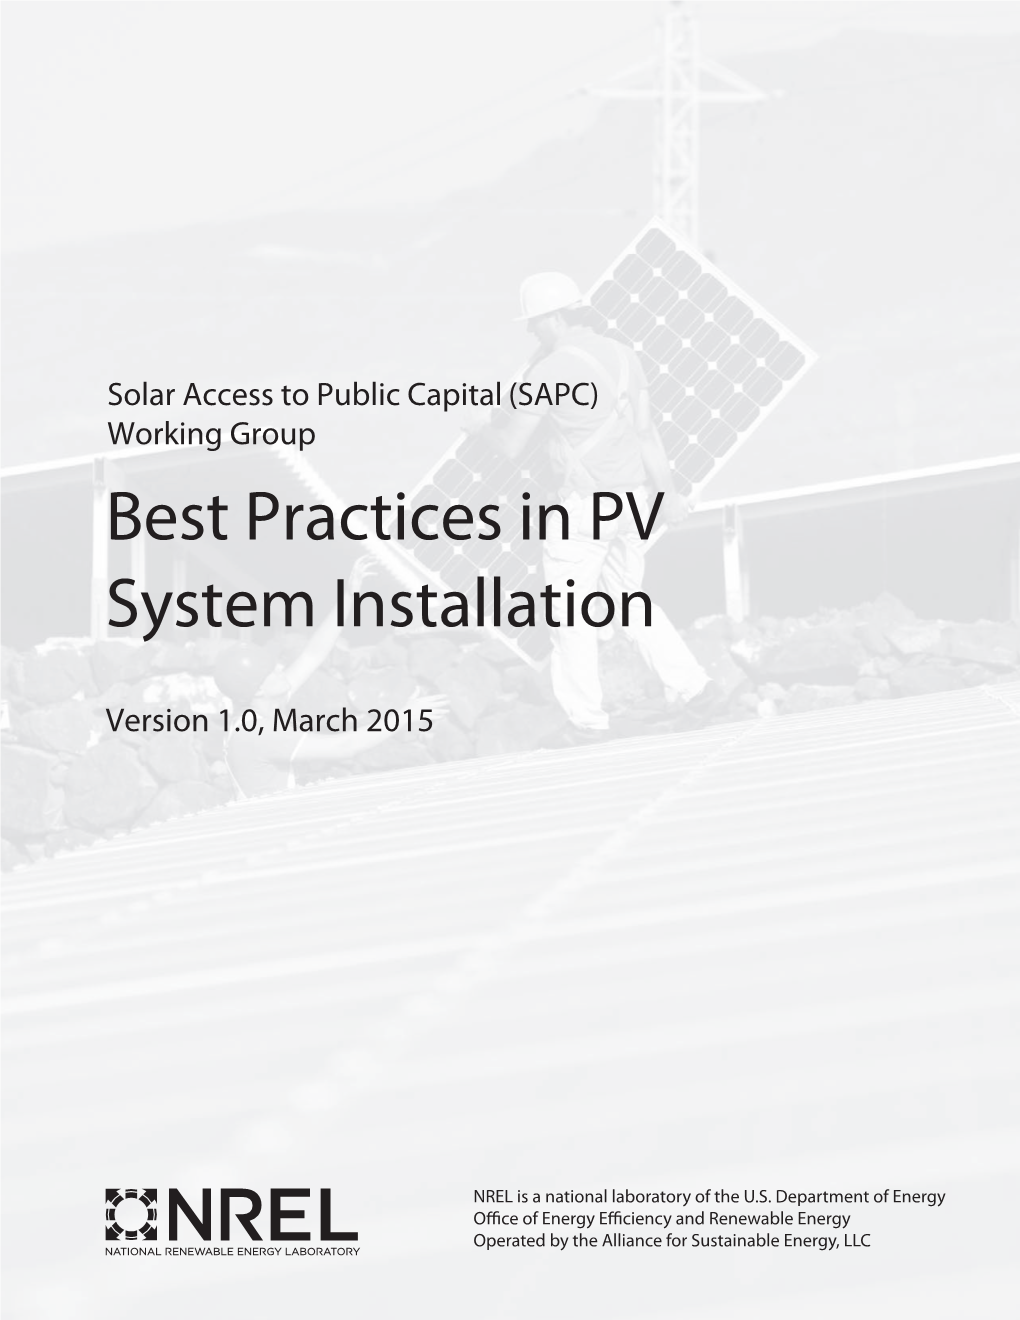 SAPC Best Practices in PV System Installation Version 1.0, March 2015 Period of Performance October 2014 – September 2015 C